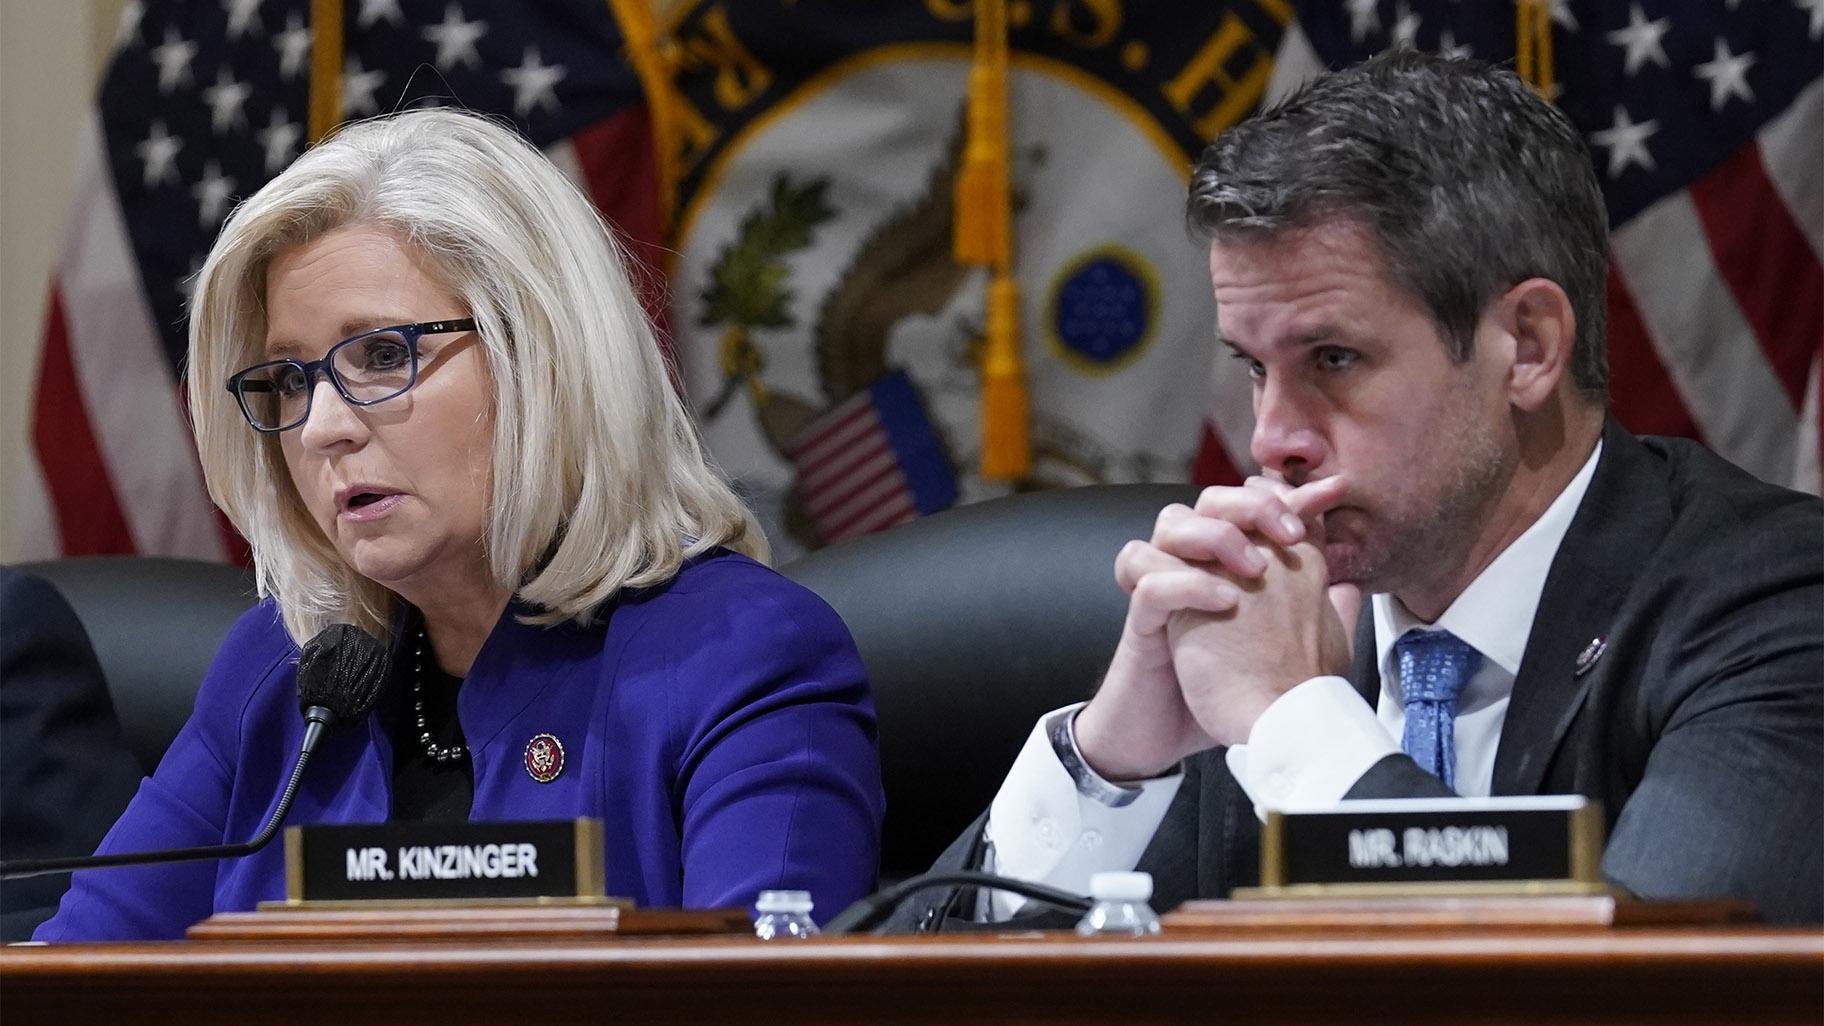 Rep. Liz Cheney, R-Wyo., and Rep. Adam Kinzinger, R-Ill., listen as the House select committee tasked with investigating the Jan. 6 attack on the U.S. Capitol meets on Capitol Hill in Washington, Oct. 19, 2021.  (AP Photo / J. Scott Applewhite, File)